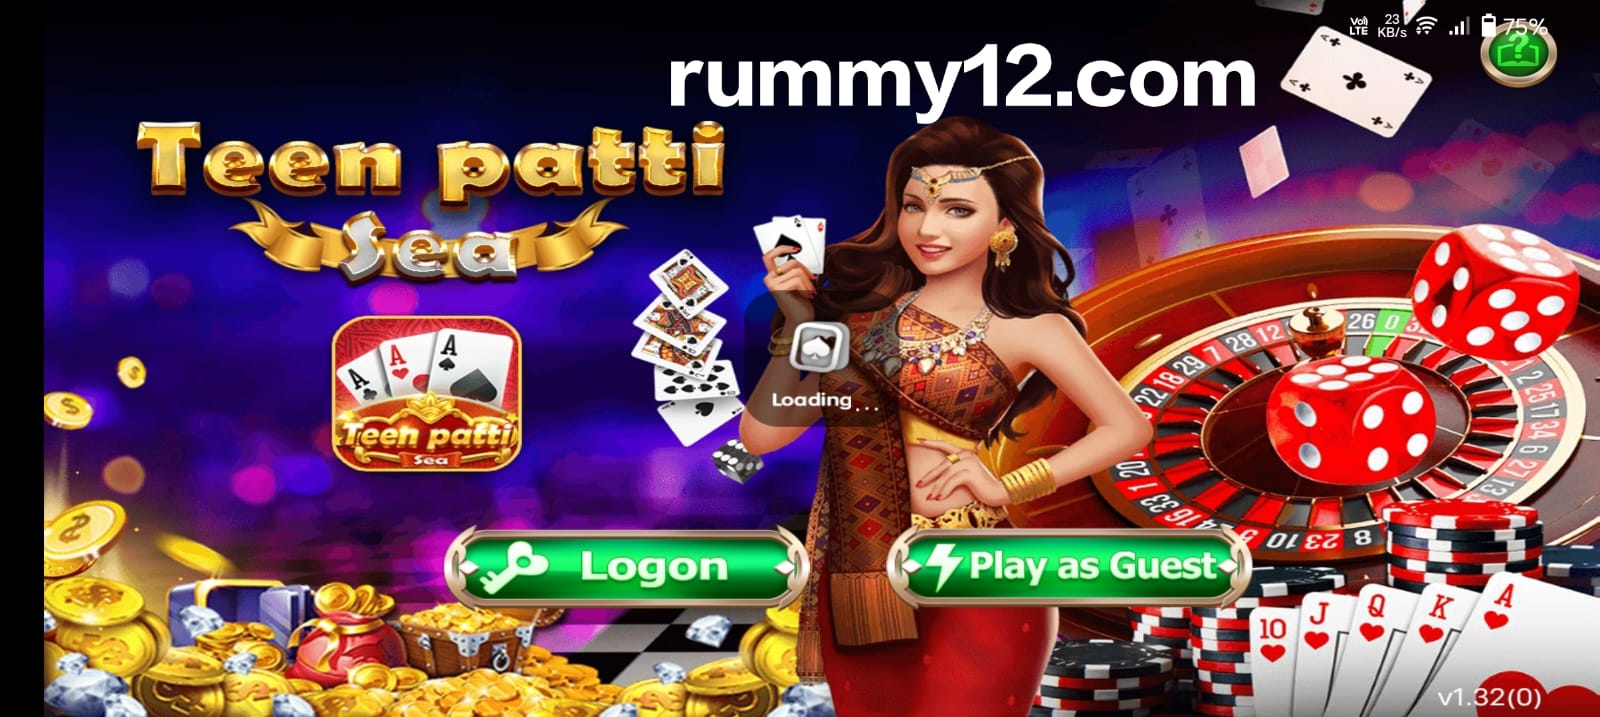 Register A New Account On Teen Patti Sea Application